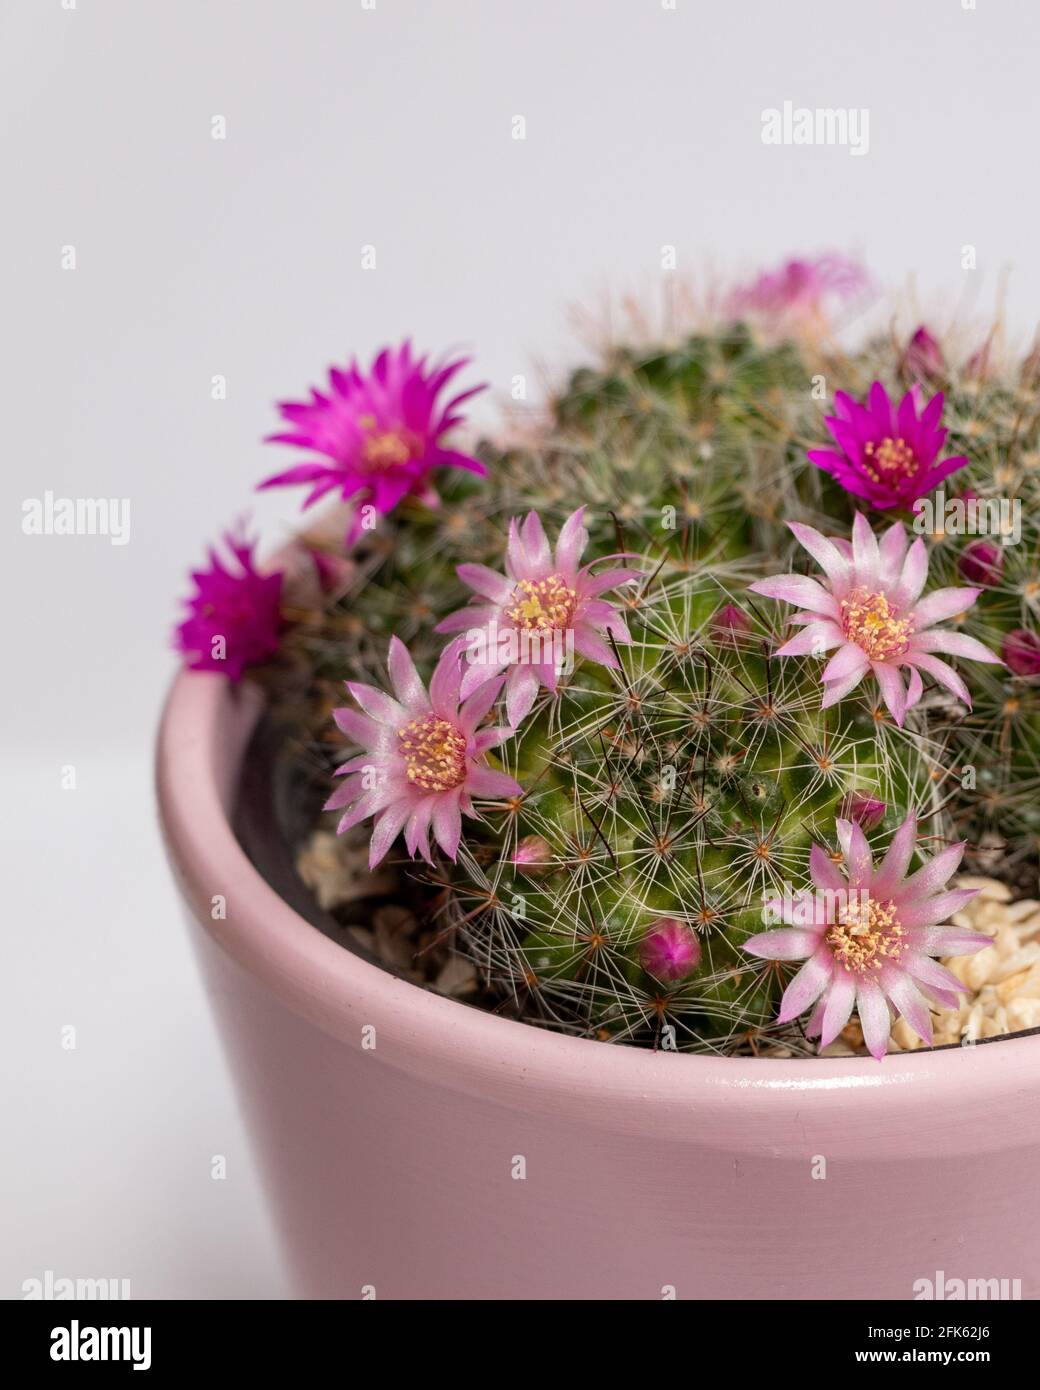 Blooming mamillaria cactus flower in clay pot on white blurred background. Selective focus. Close up. Stock Photo